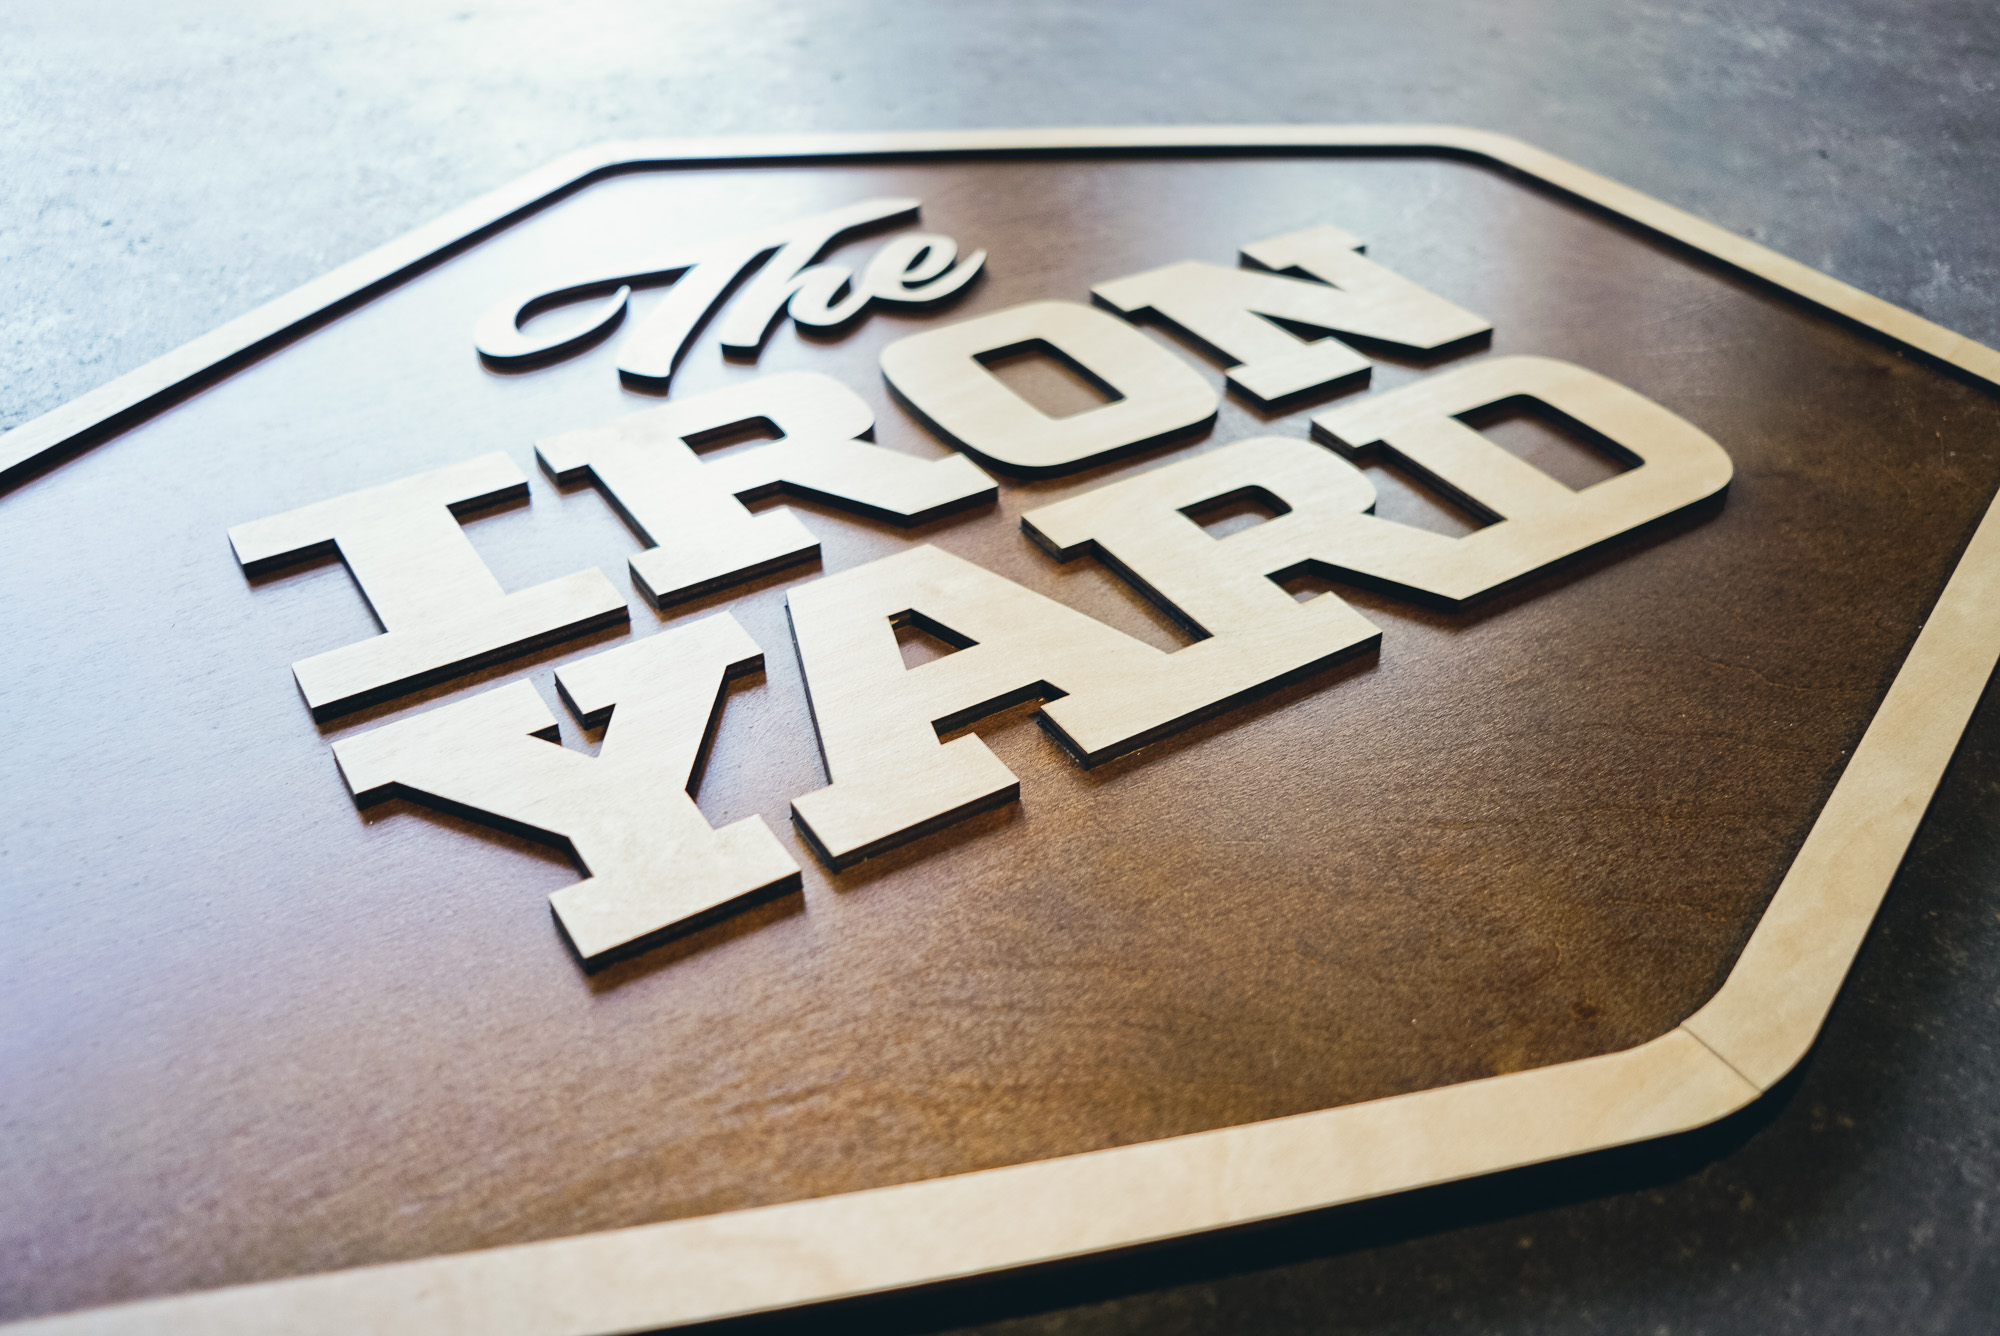 Raised two-toned wood sign for The Iron Yard, a 12-week coding school offered in multiple cities across the US and in London.